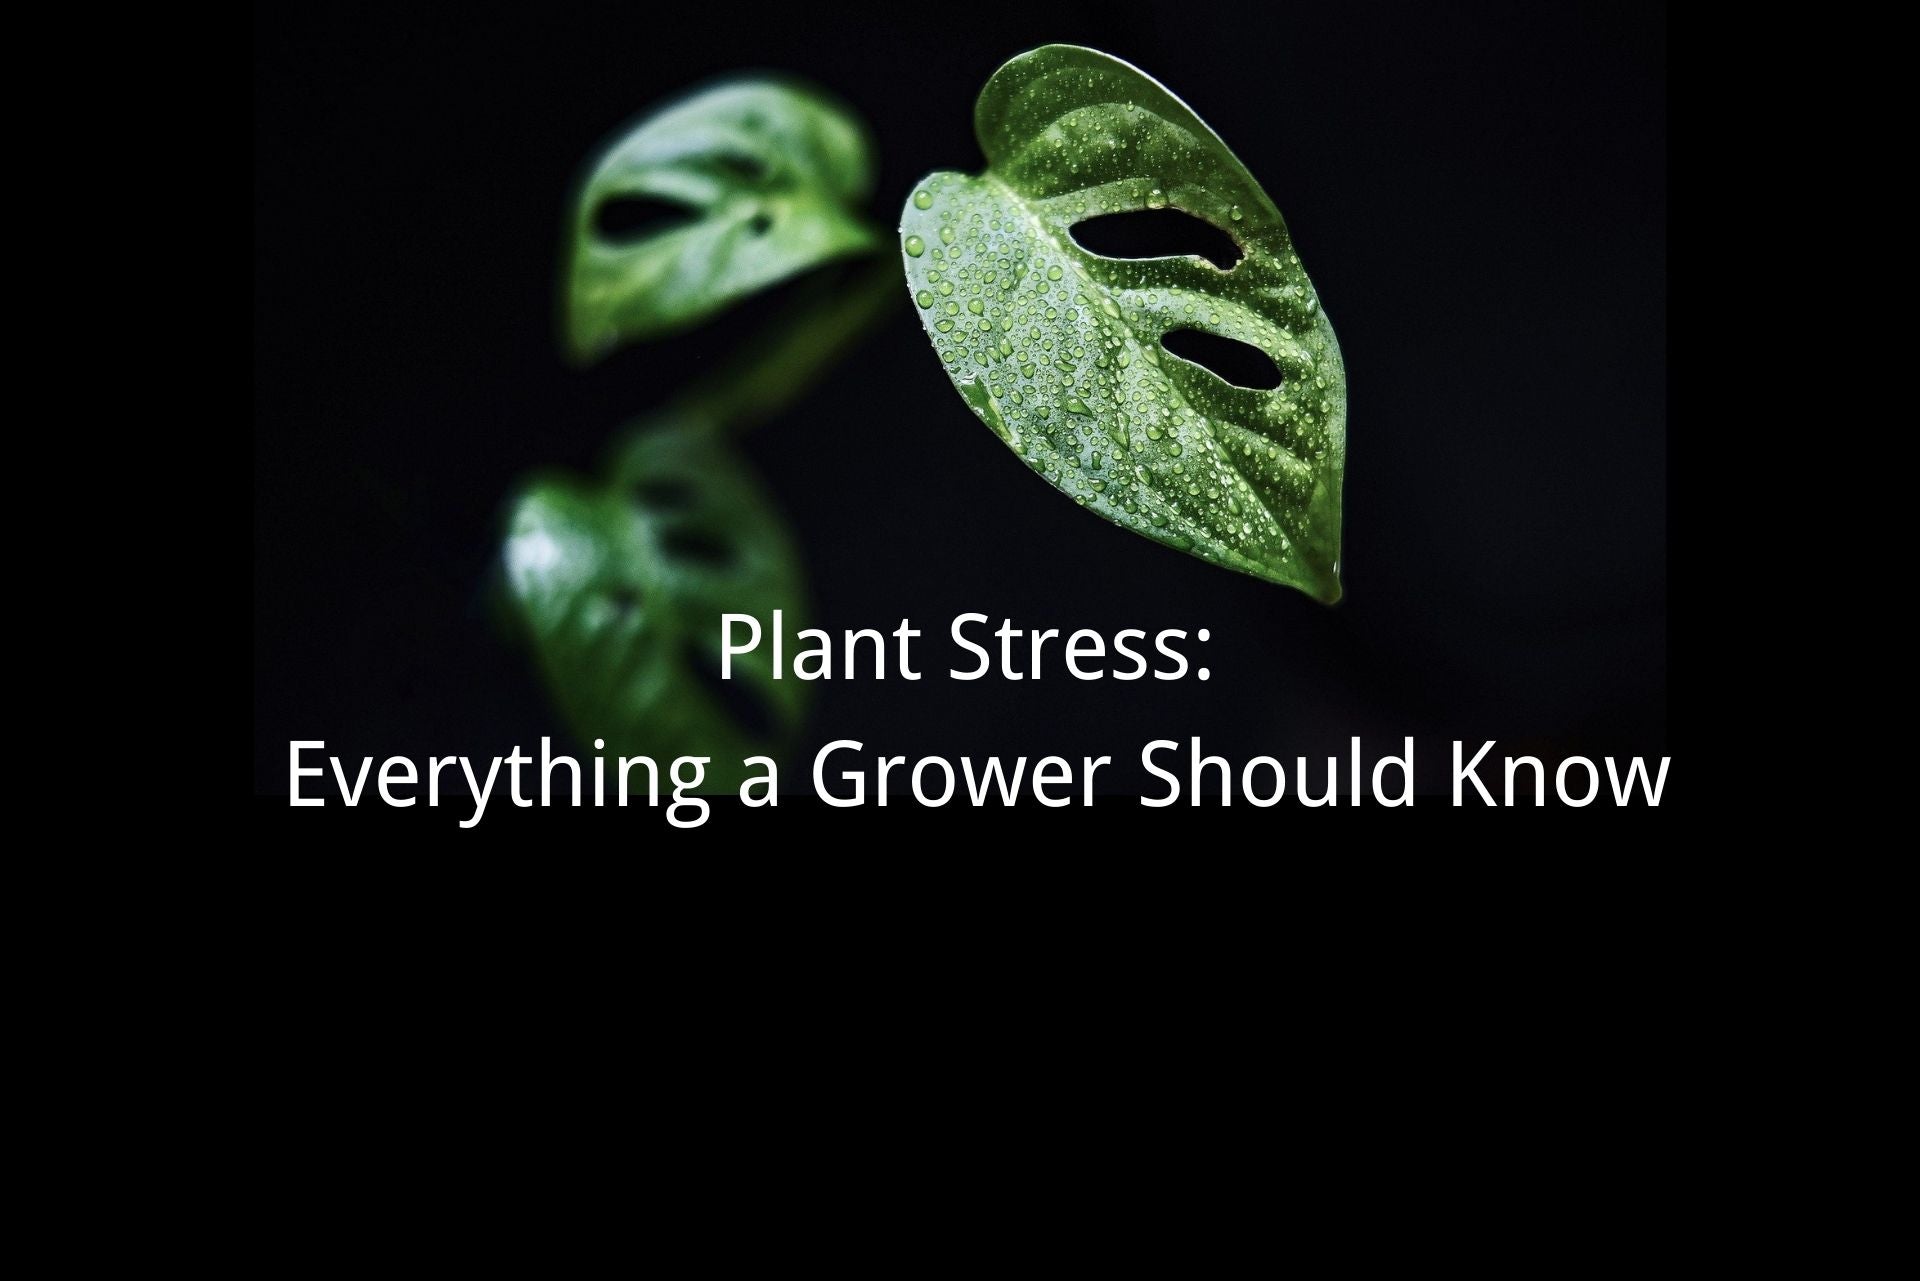 Plant Stress: Everything a Grower Should Know